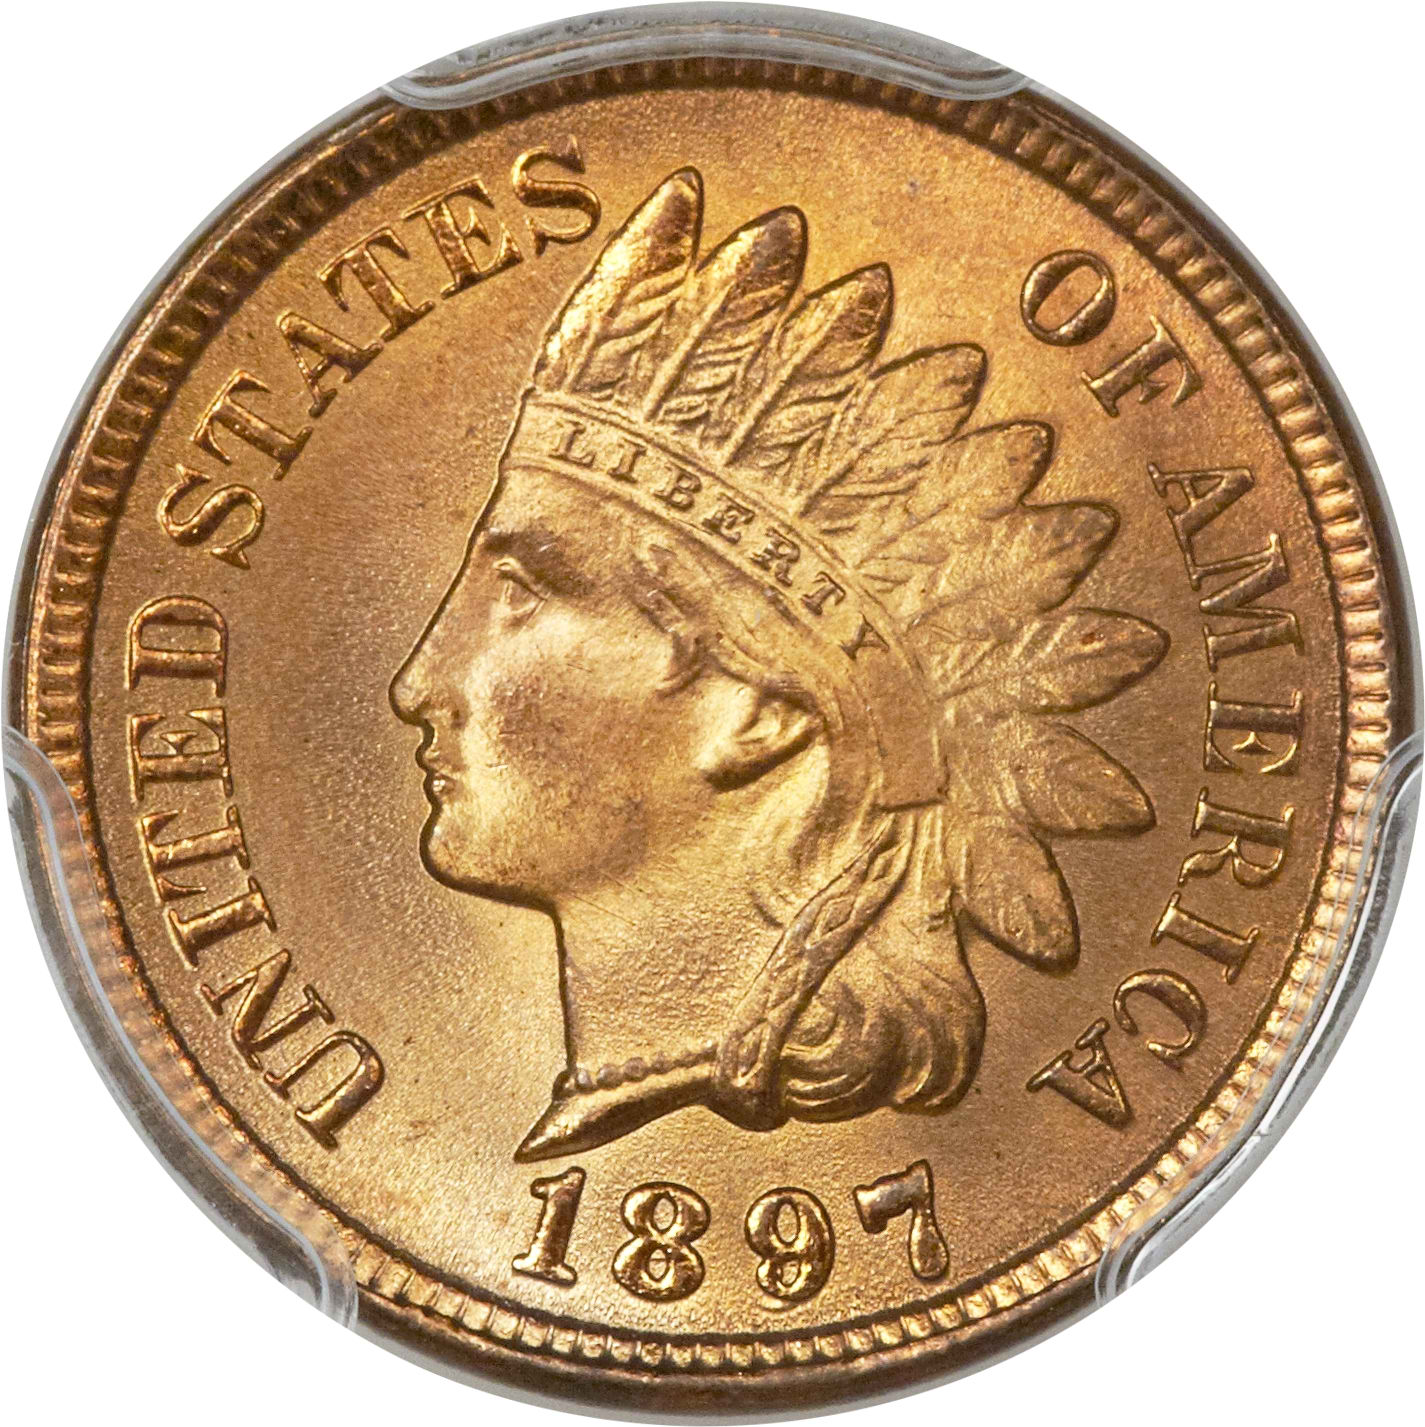 1897 RPD-008 Indian Head Penny - Photos courtesy of Heritage Auctions